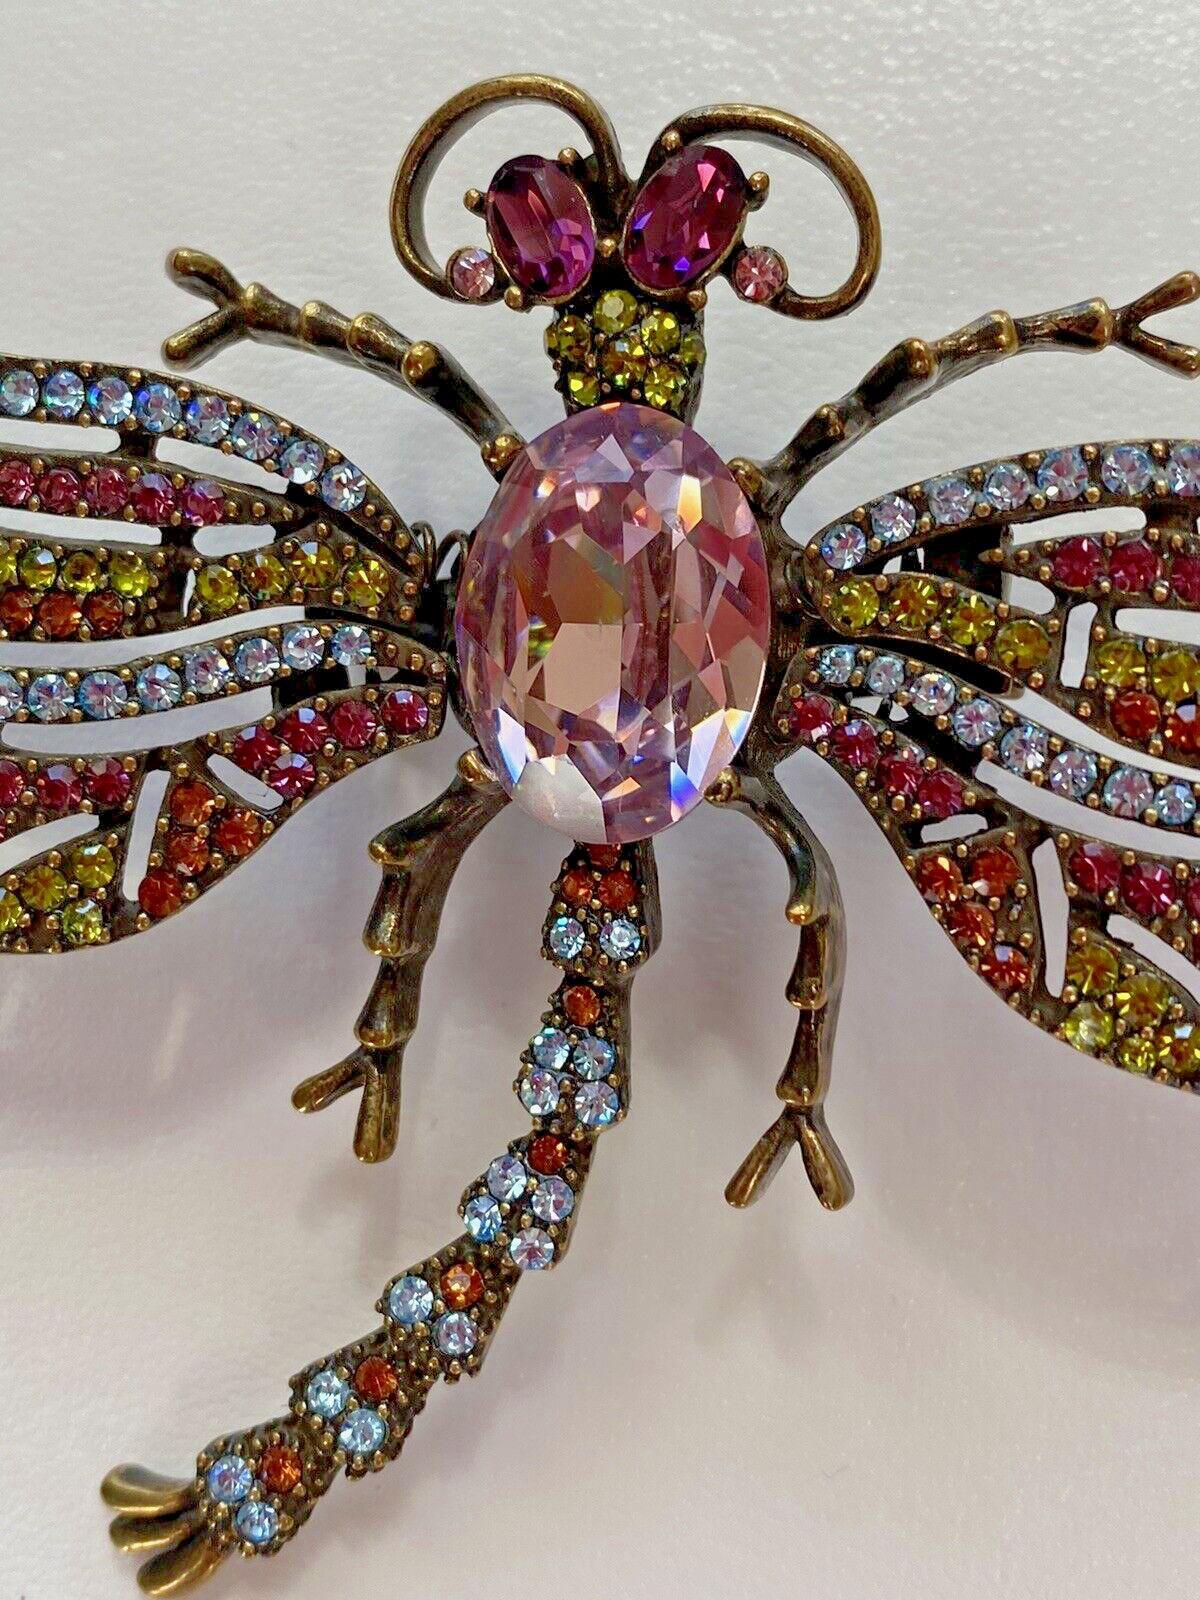 Simply Beautiful! Signed Heidi Daus Designer Tremblant Crystal Dragonfly Brooch Centering a Purple Amethyst Crystal. Surrounded by a myriad of pave Sparkling Crystals in blue, purple and green. Stunning Statement Brooch! Spring-loaded wings creating